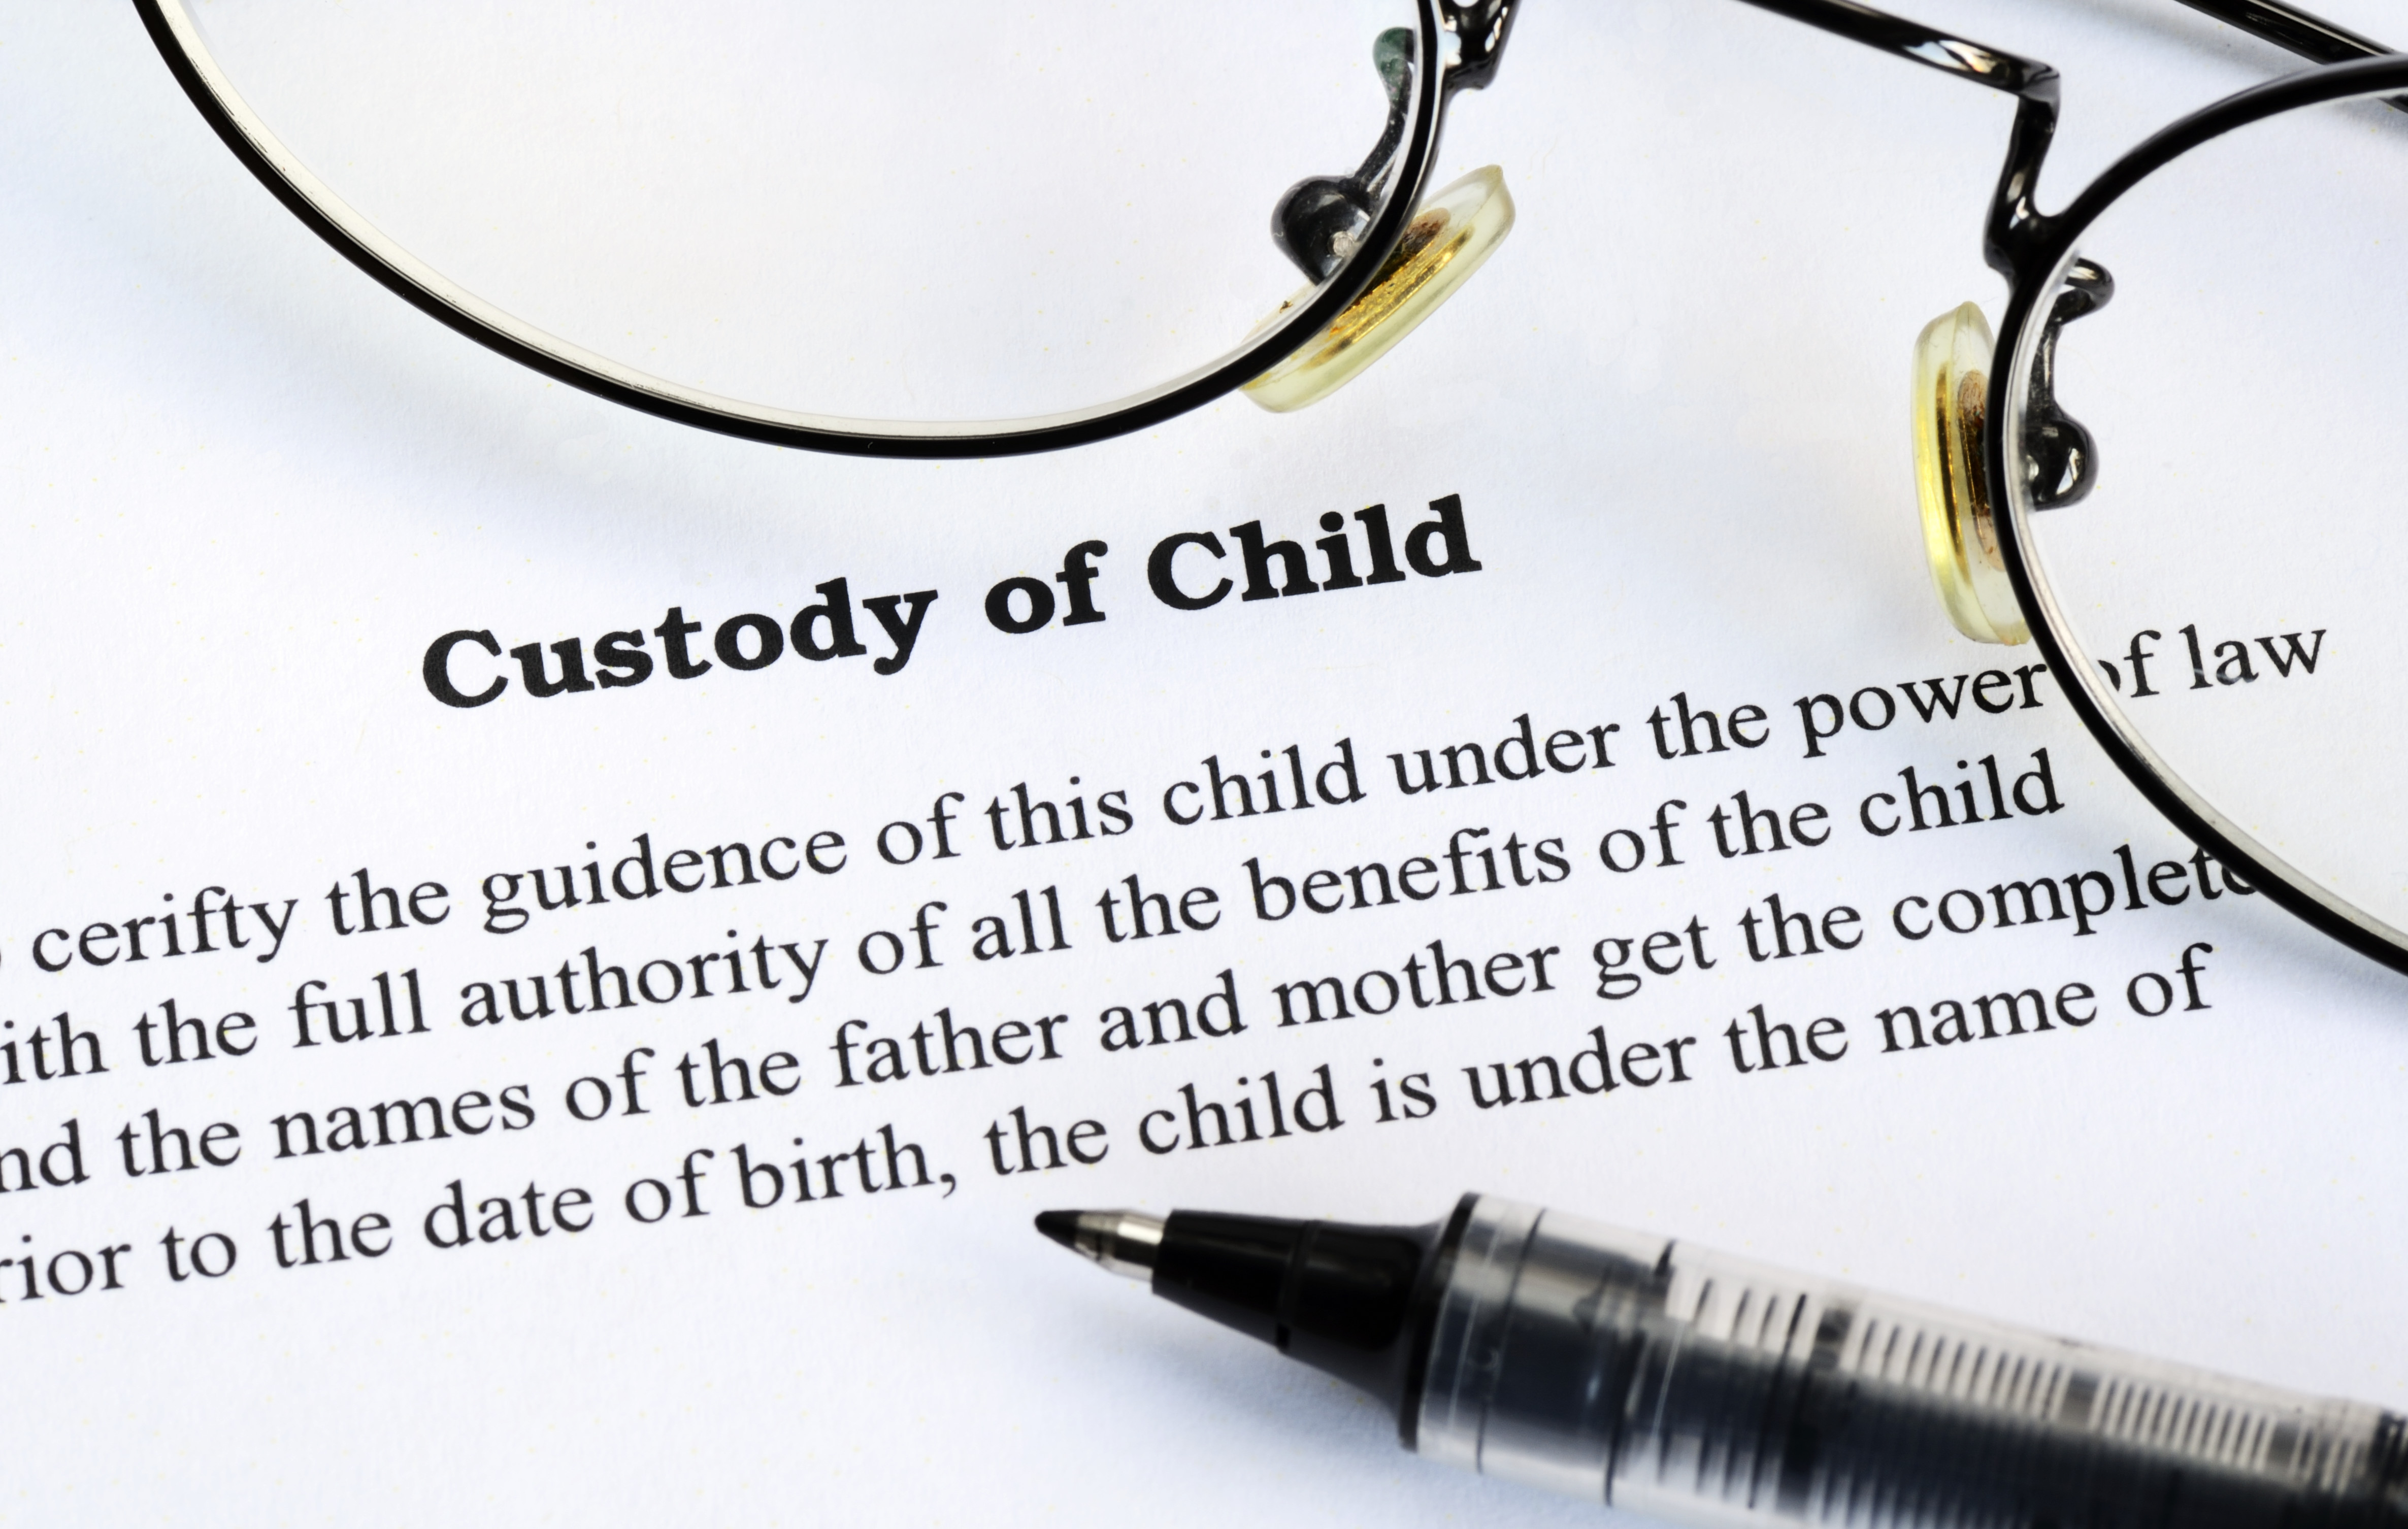 Custody,Of,Child,Concept,Of,Family,Laws,And,Adoption